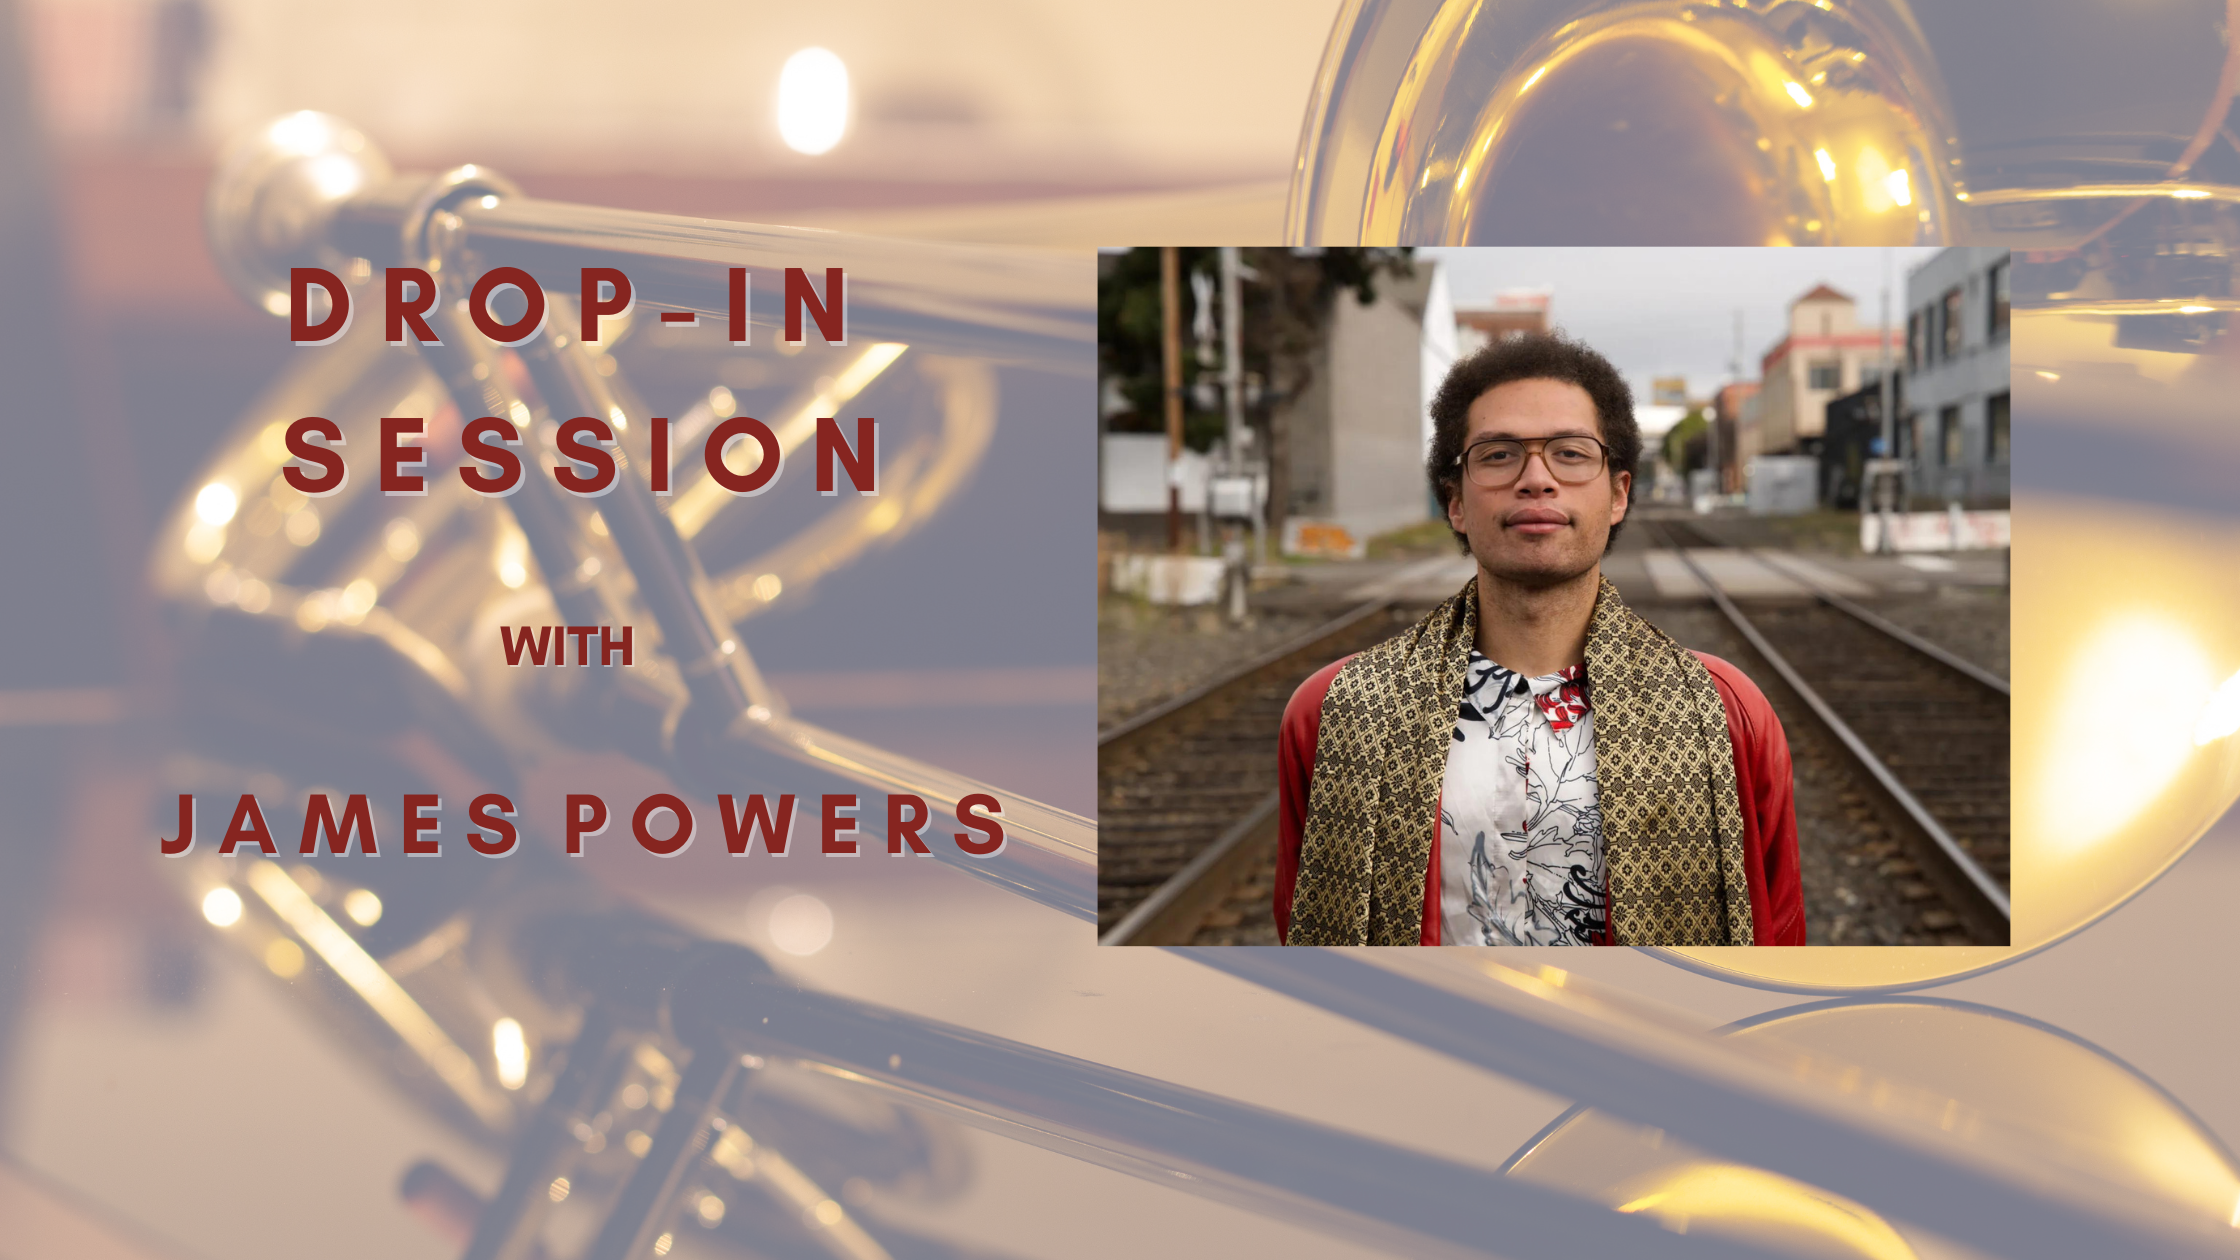 Drop-In Session with James Powers